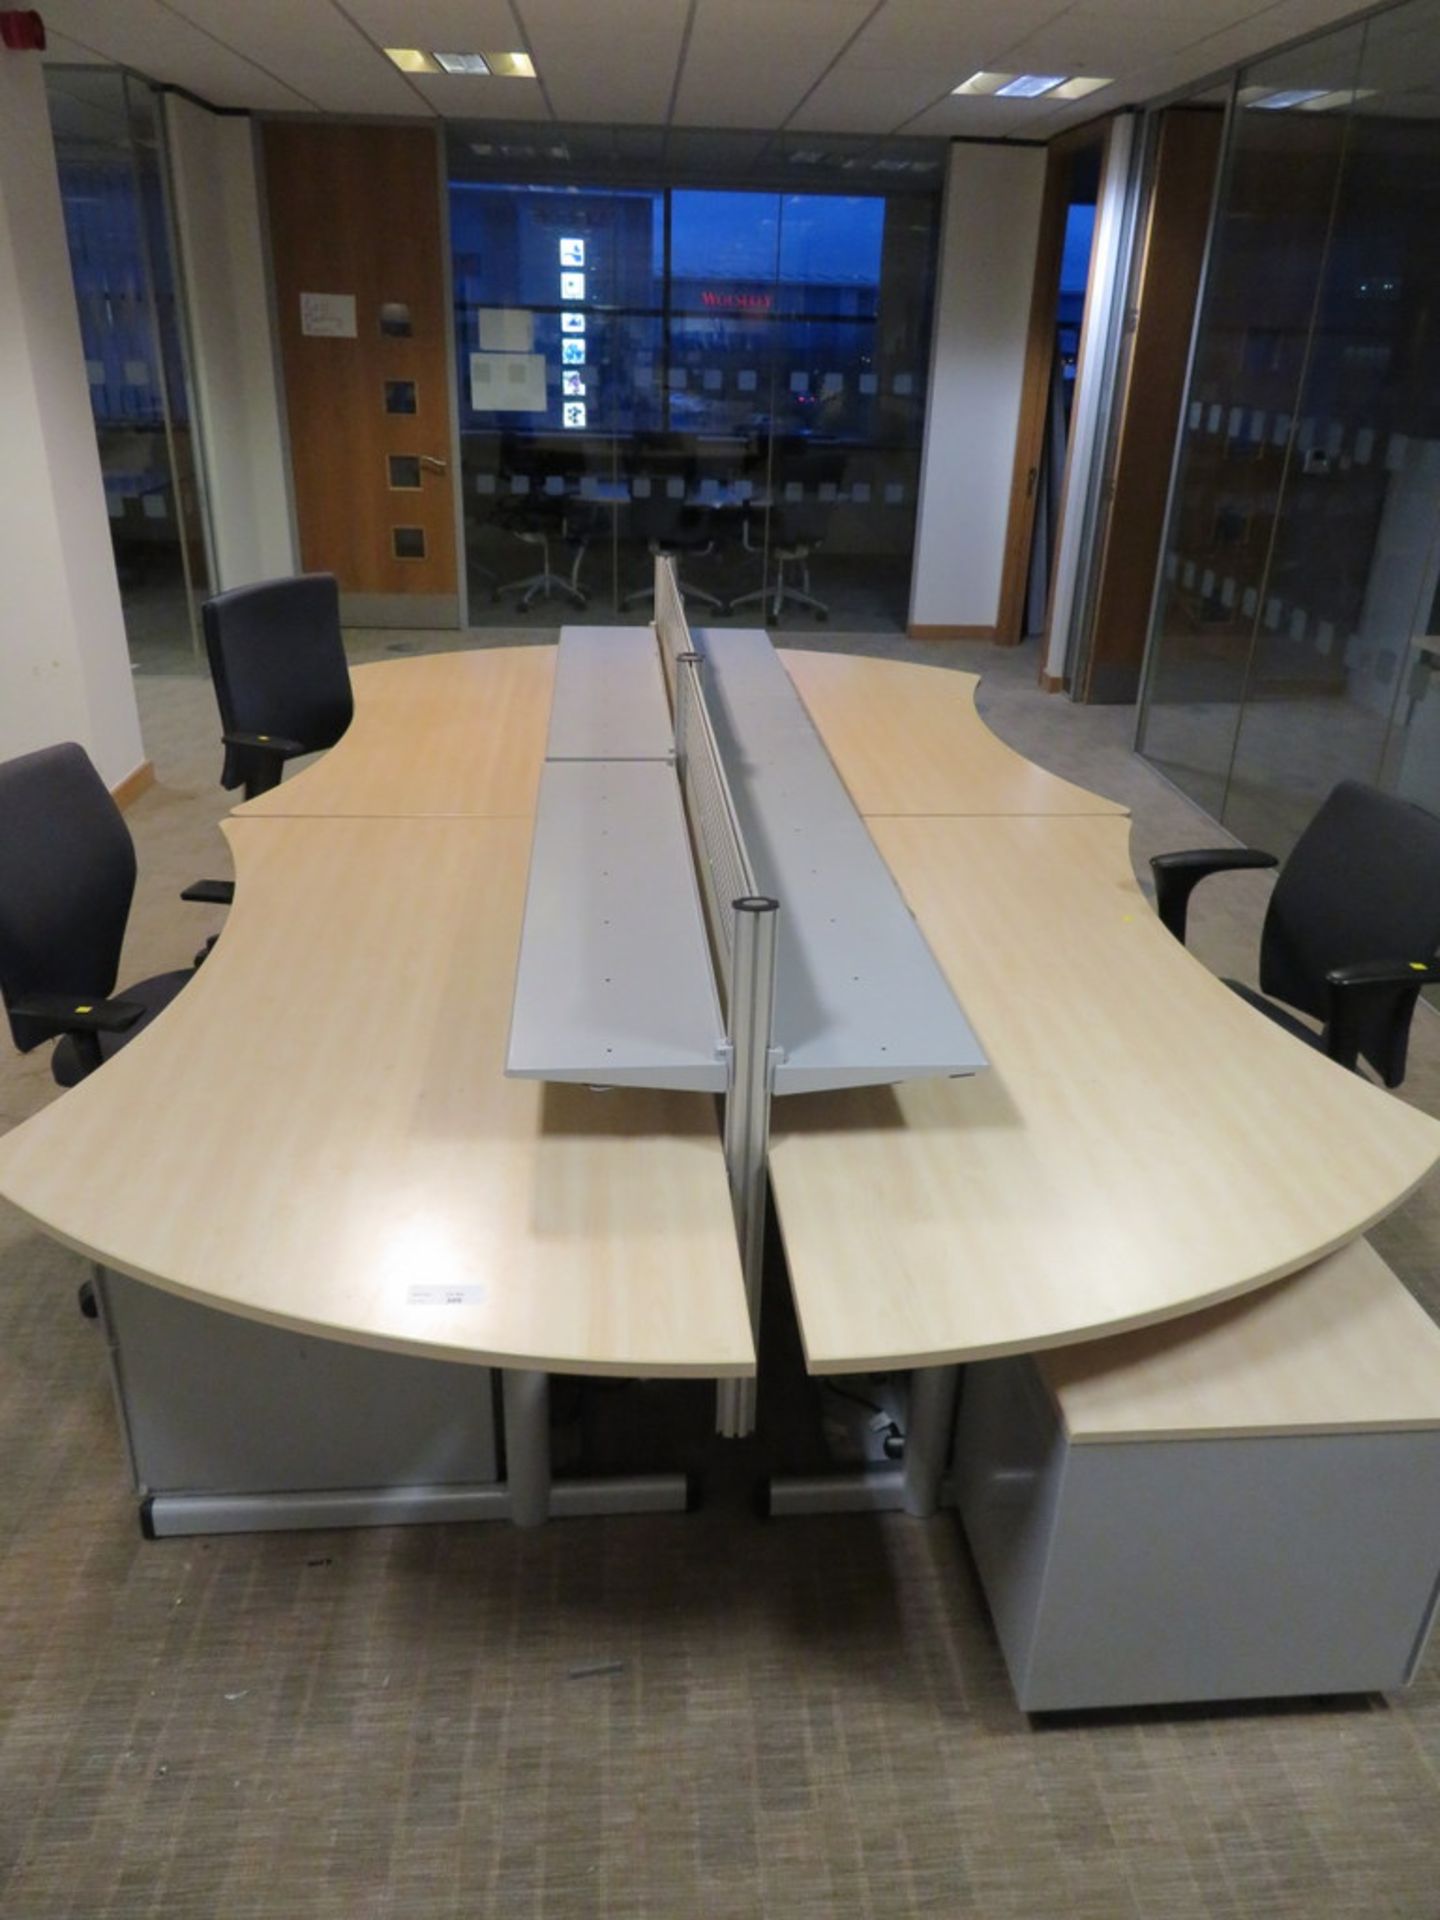 4 X LIGHTWOOD EFFECT OFFICE DESKS, 3 X SWIVEL CHAIRS, 3 X PEDESTALS AND - Image 3 of 3